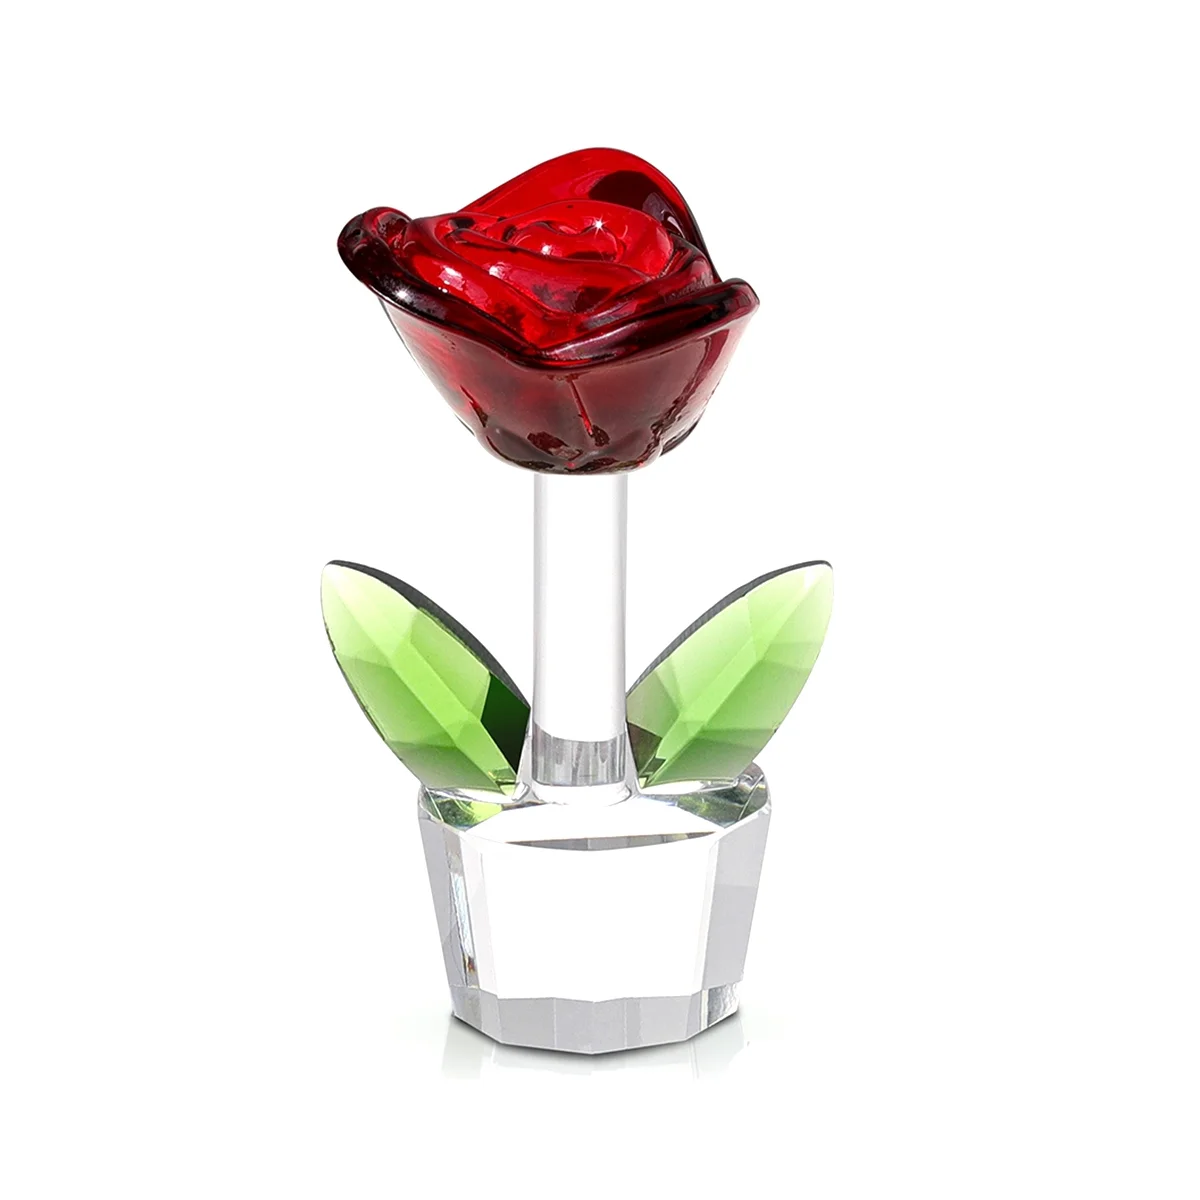 

Mini Crystal Roses Flower Figurines Glass Home Decor Ornaments Collectible Figurine Romantic Gift for Girlfriend,for Mom